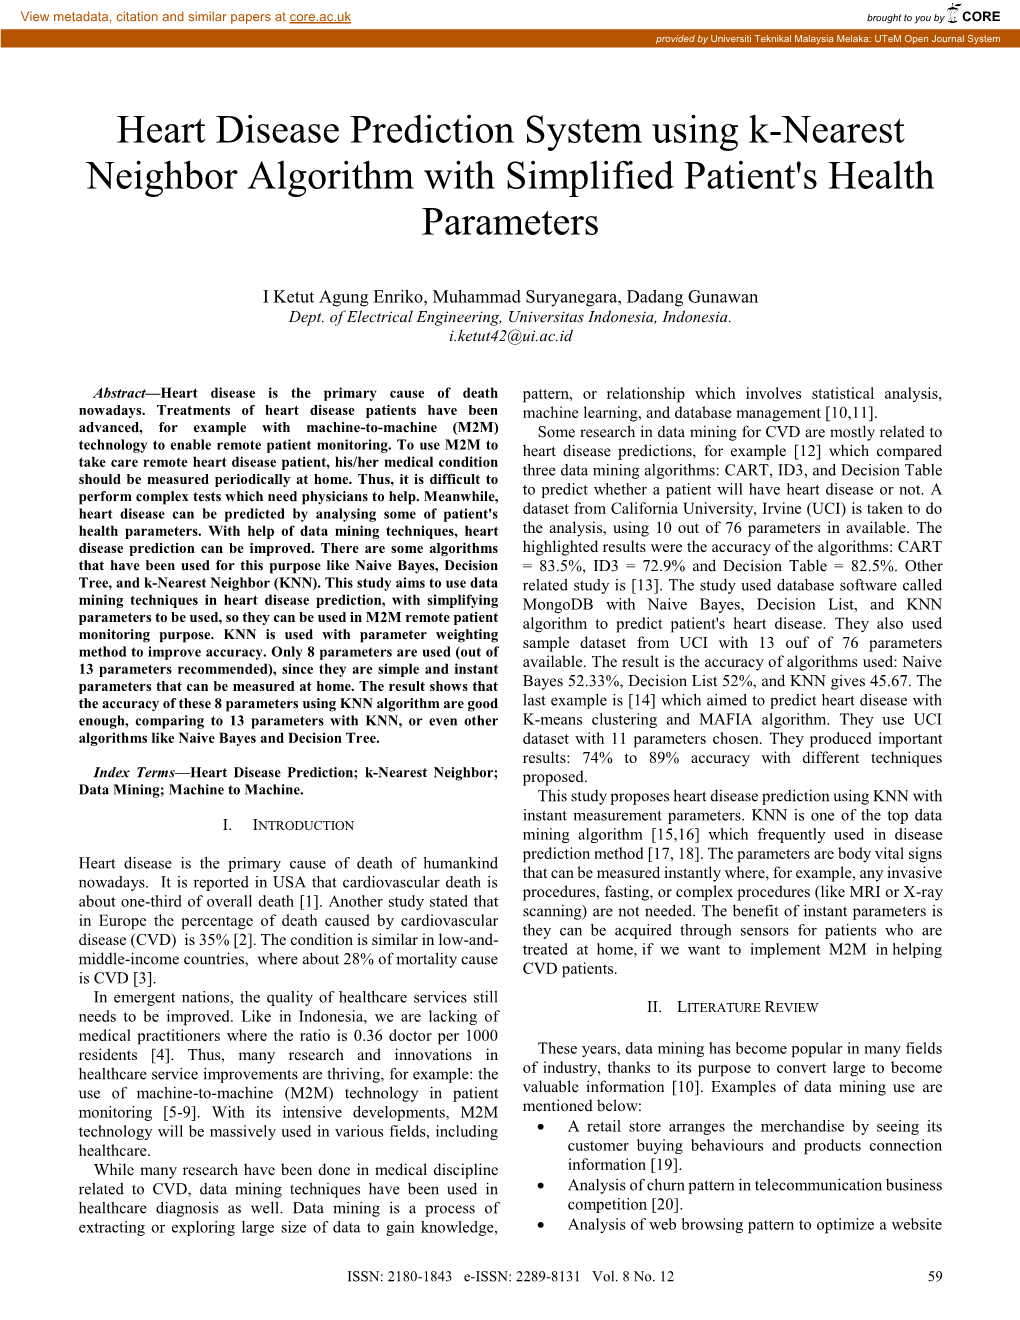 Heart Disease Prediction System Using K-Nearest Neighbor Algorithm with Simplified Patient's Health Parameters